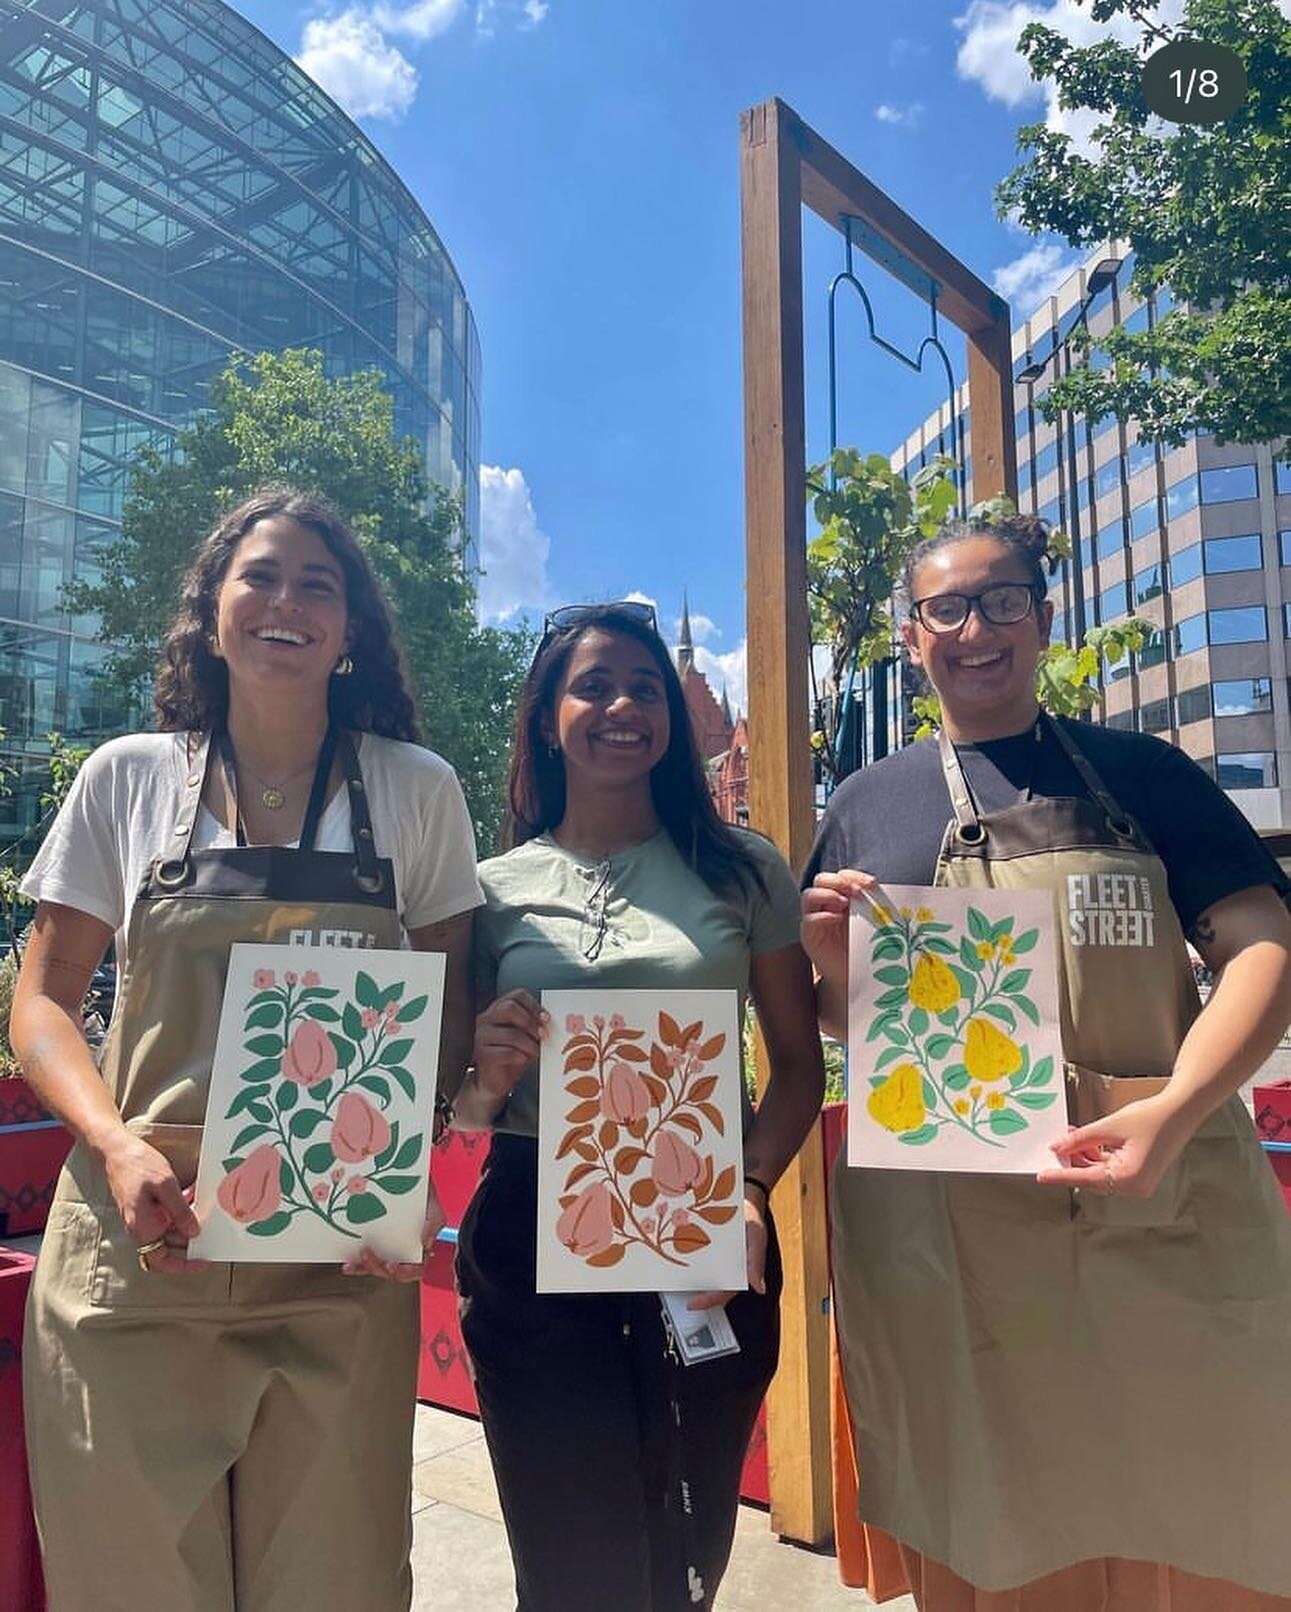 Loved running a series of drop-in art workshops at Holborn Circus. Using stencils, paint, colour and little creative flair it&rsquo;s great to see workman, office staff, kids and passer-bys giving it a try and create these quick botanical prints. 

L